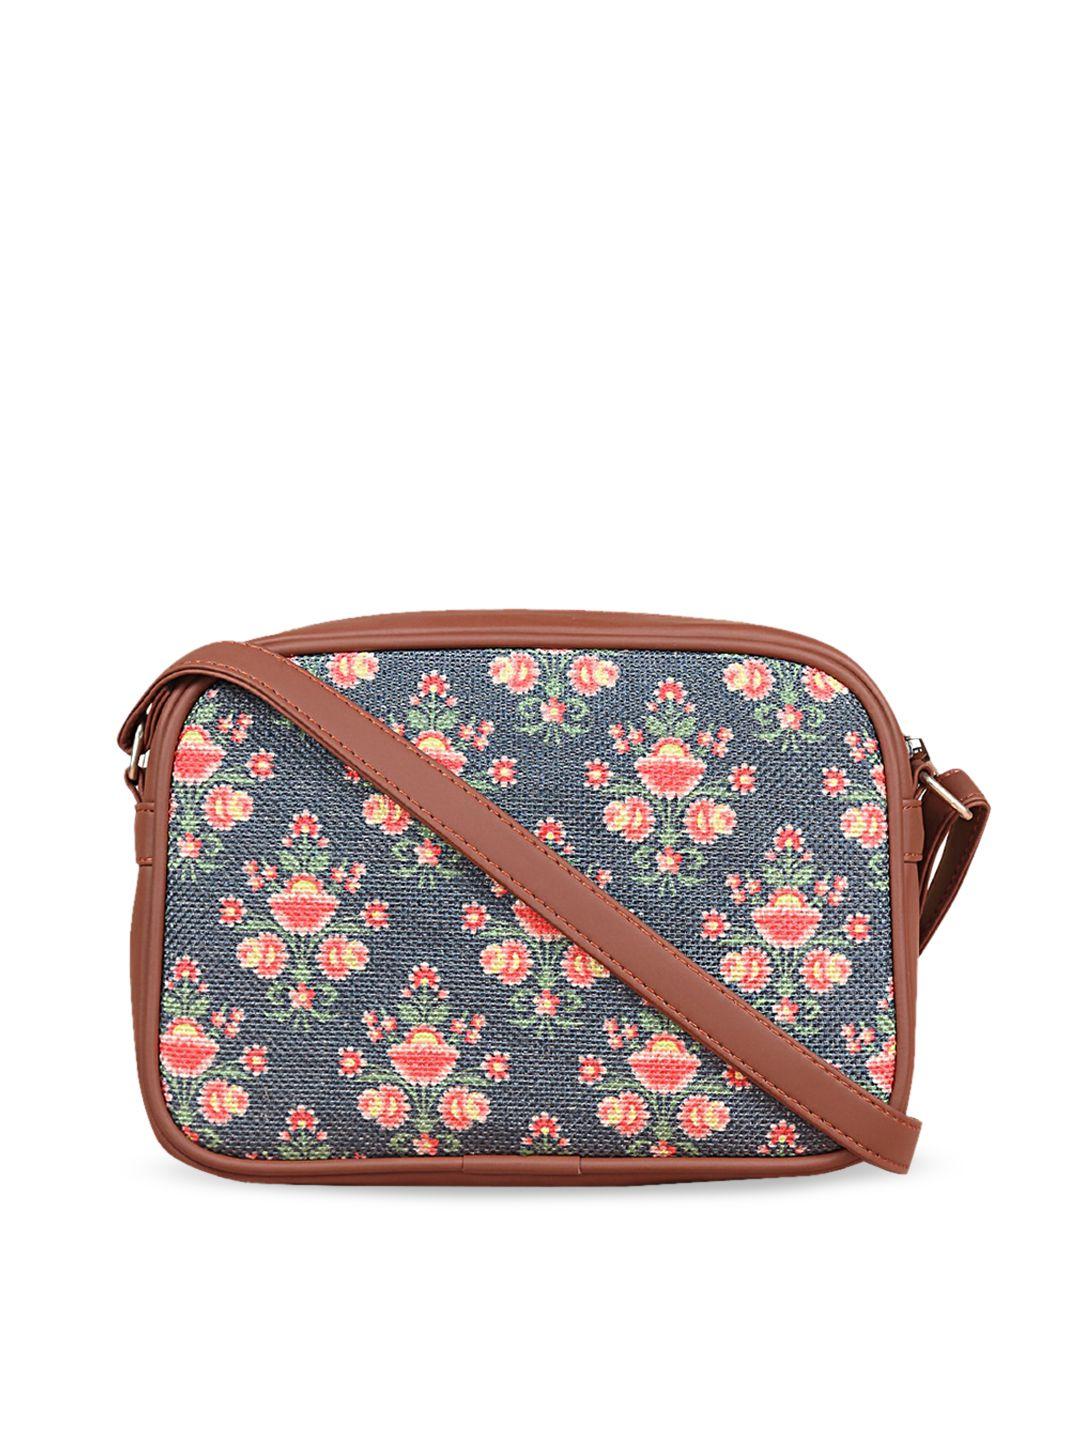 zouk navy blue floral printed structured sling bag with tasselled